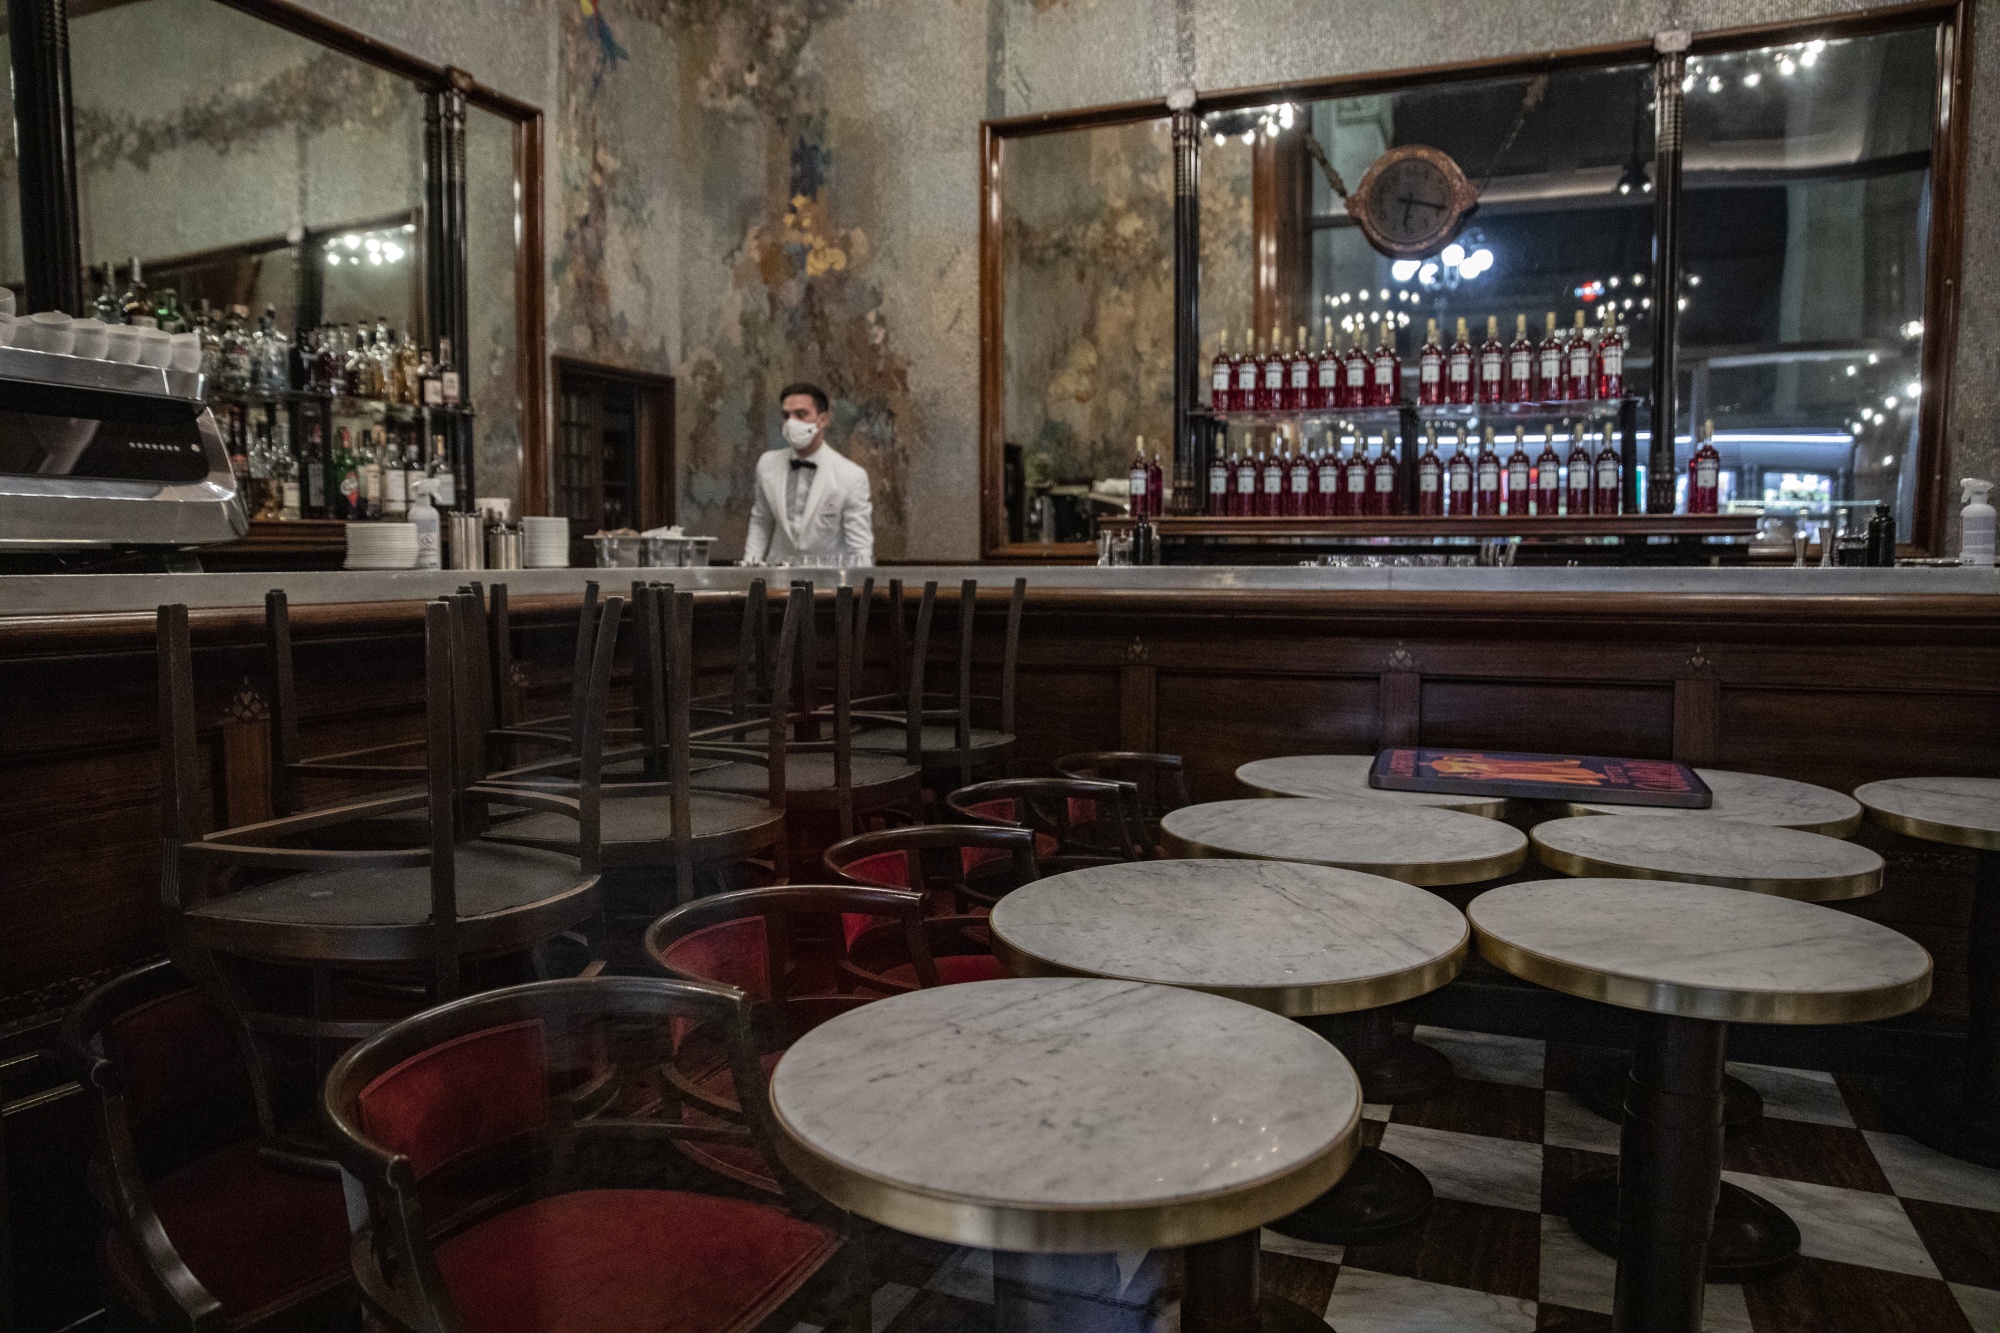 A worker prepares to closed a coffee bar before curfew in Milan, Italy, on Oct. 26.